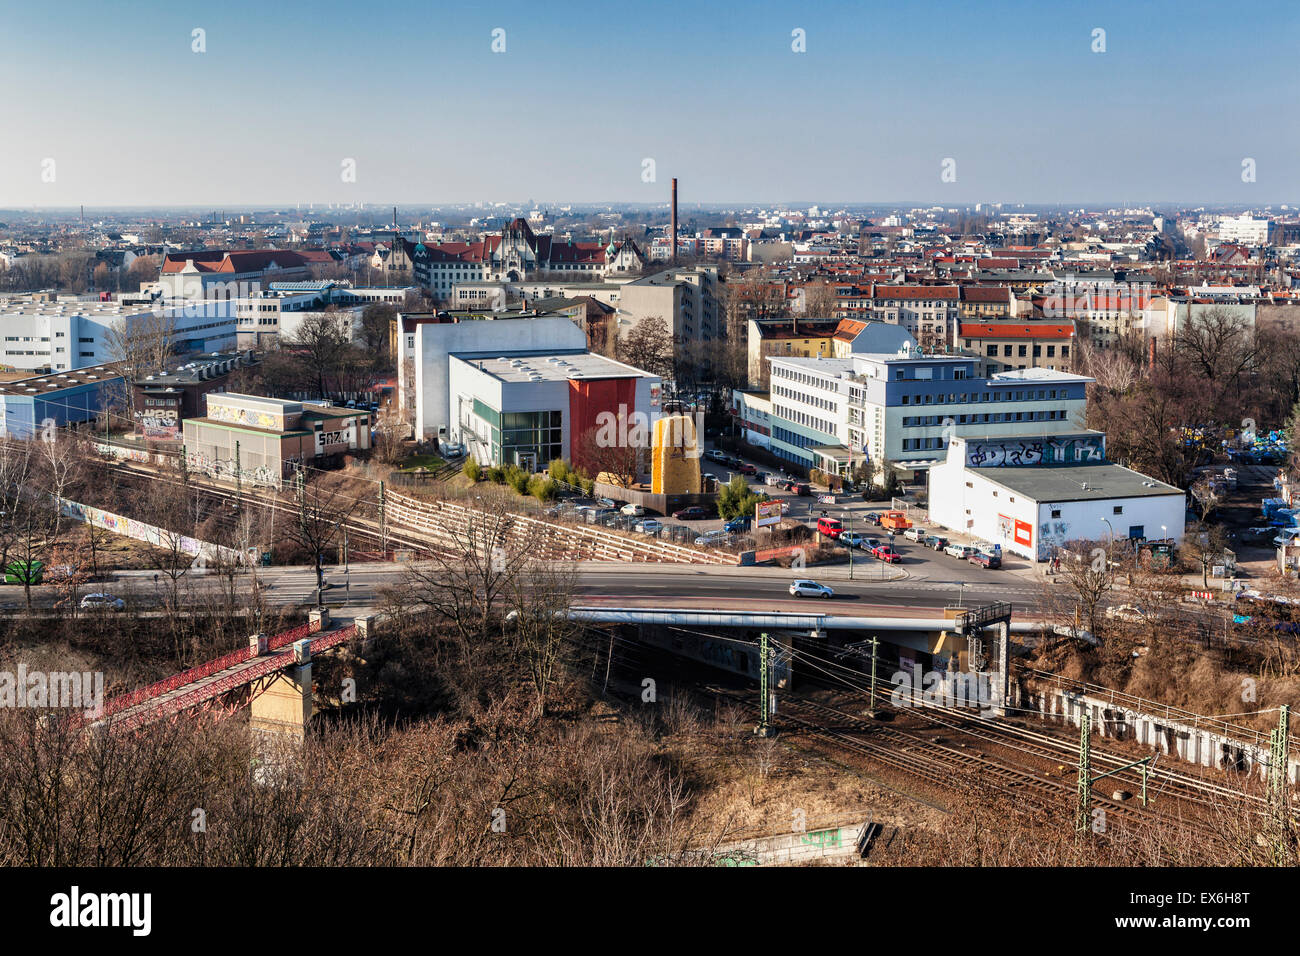 Urban landscape view of Berlin city buildings & highways from Volkspark Humboldthain park anti-aircraft tower viewing platform Stock Photo